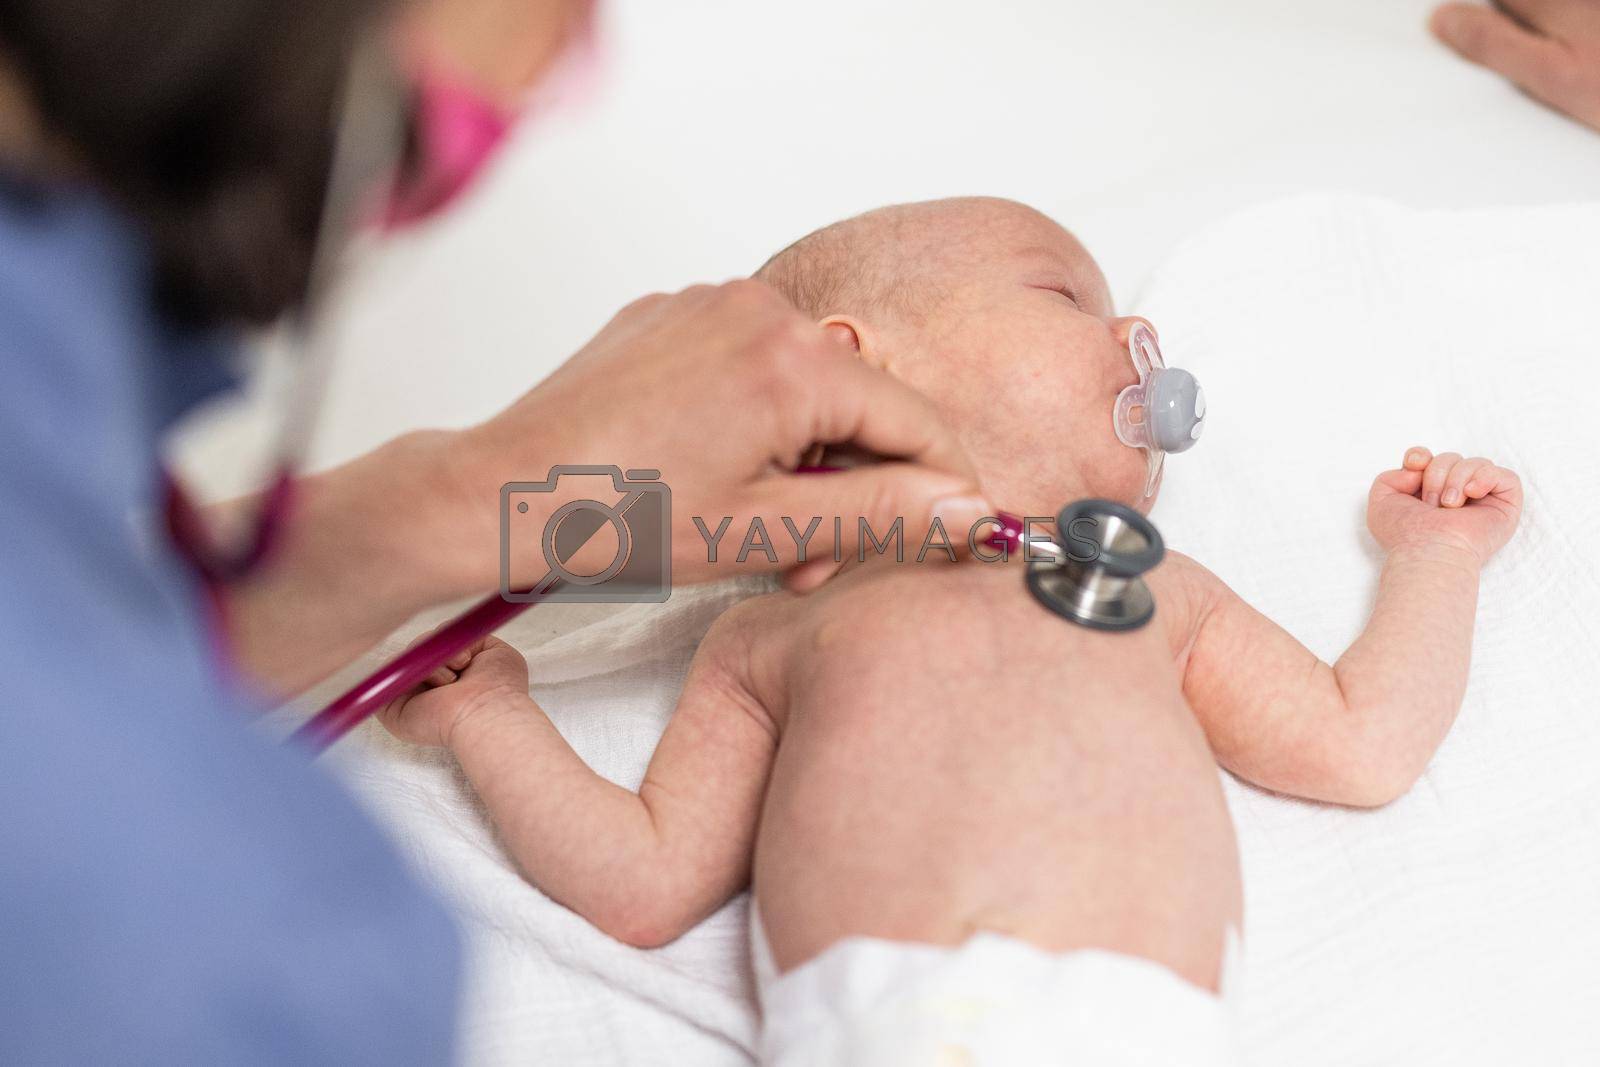 Royalty free image of Baby lying on his back as his doctor examines him during a standard medical checkup by kasto